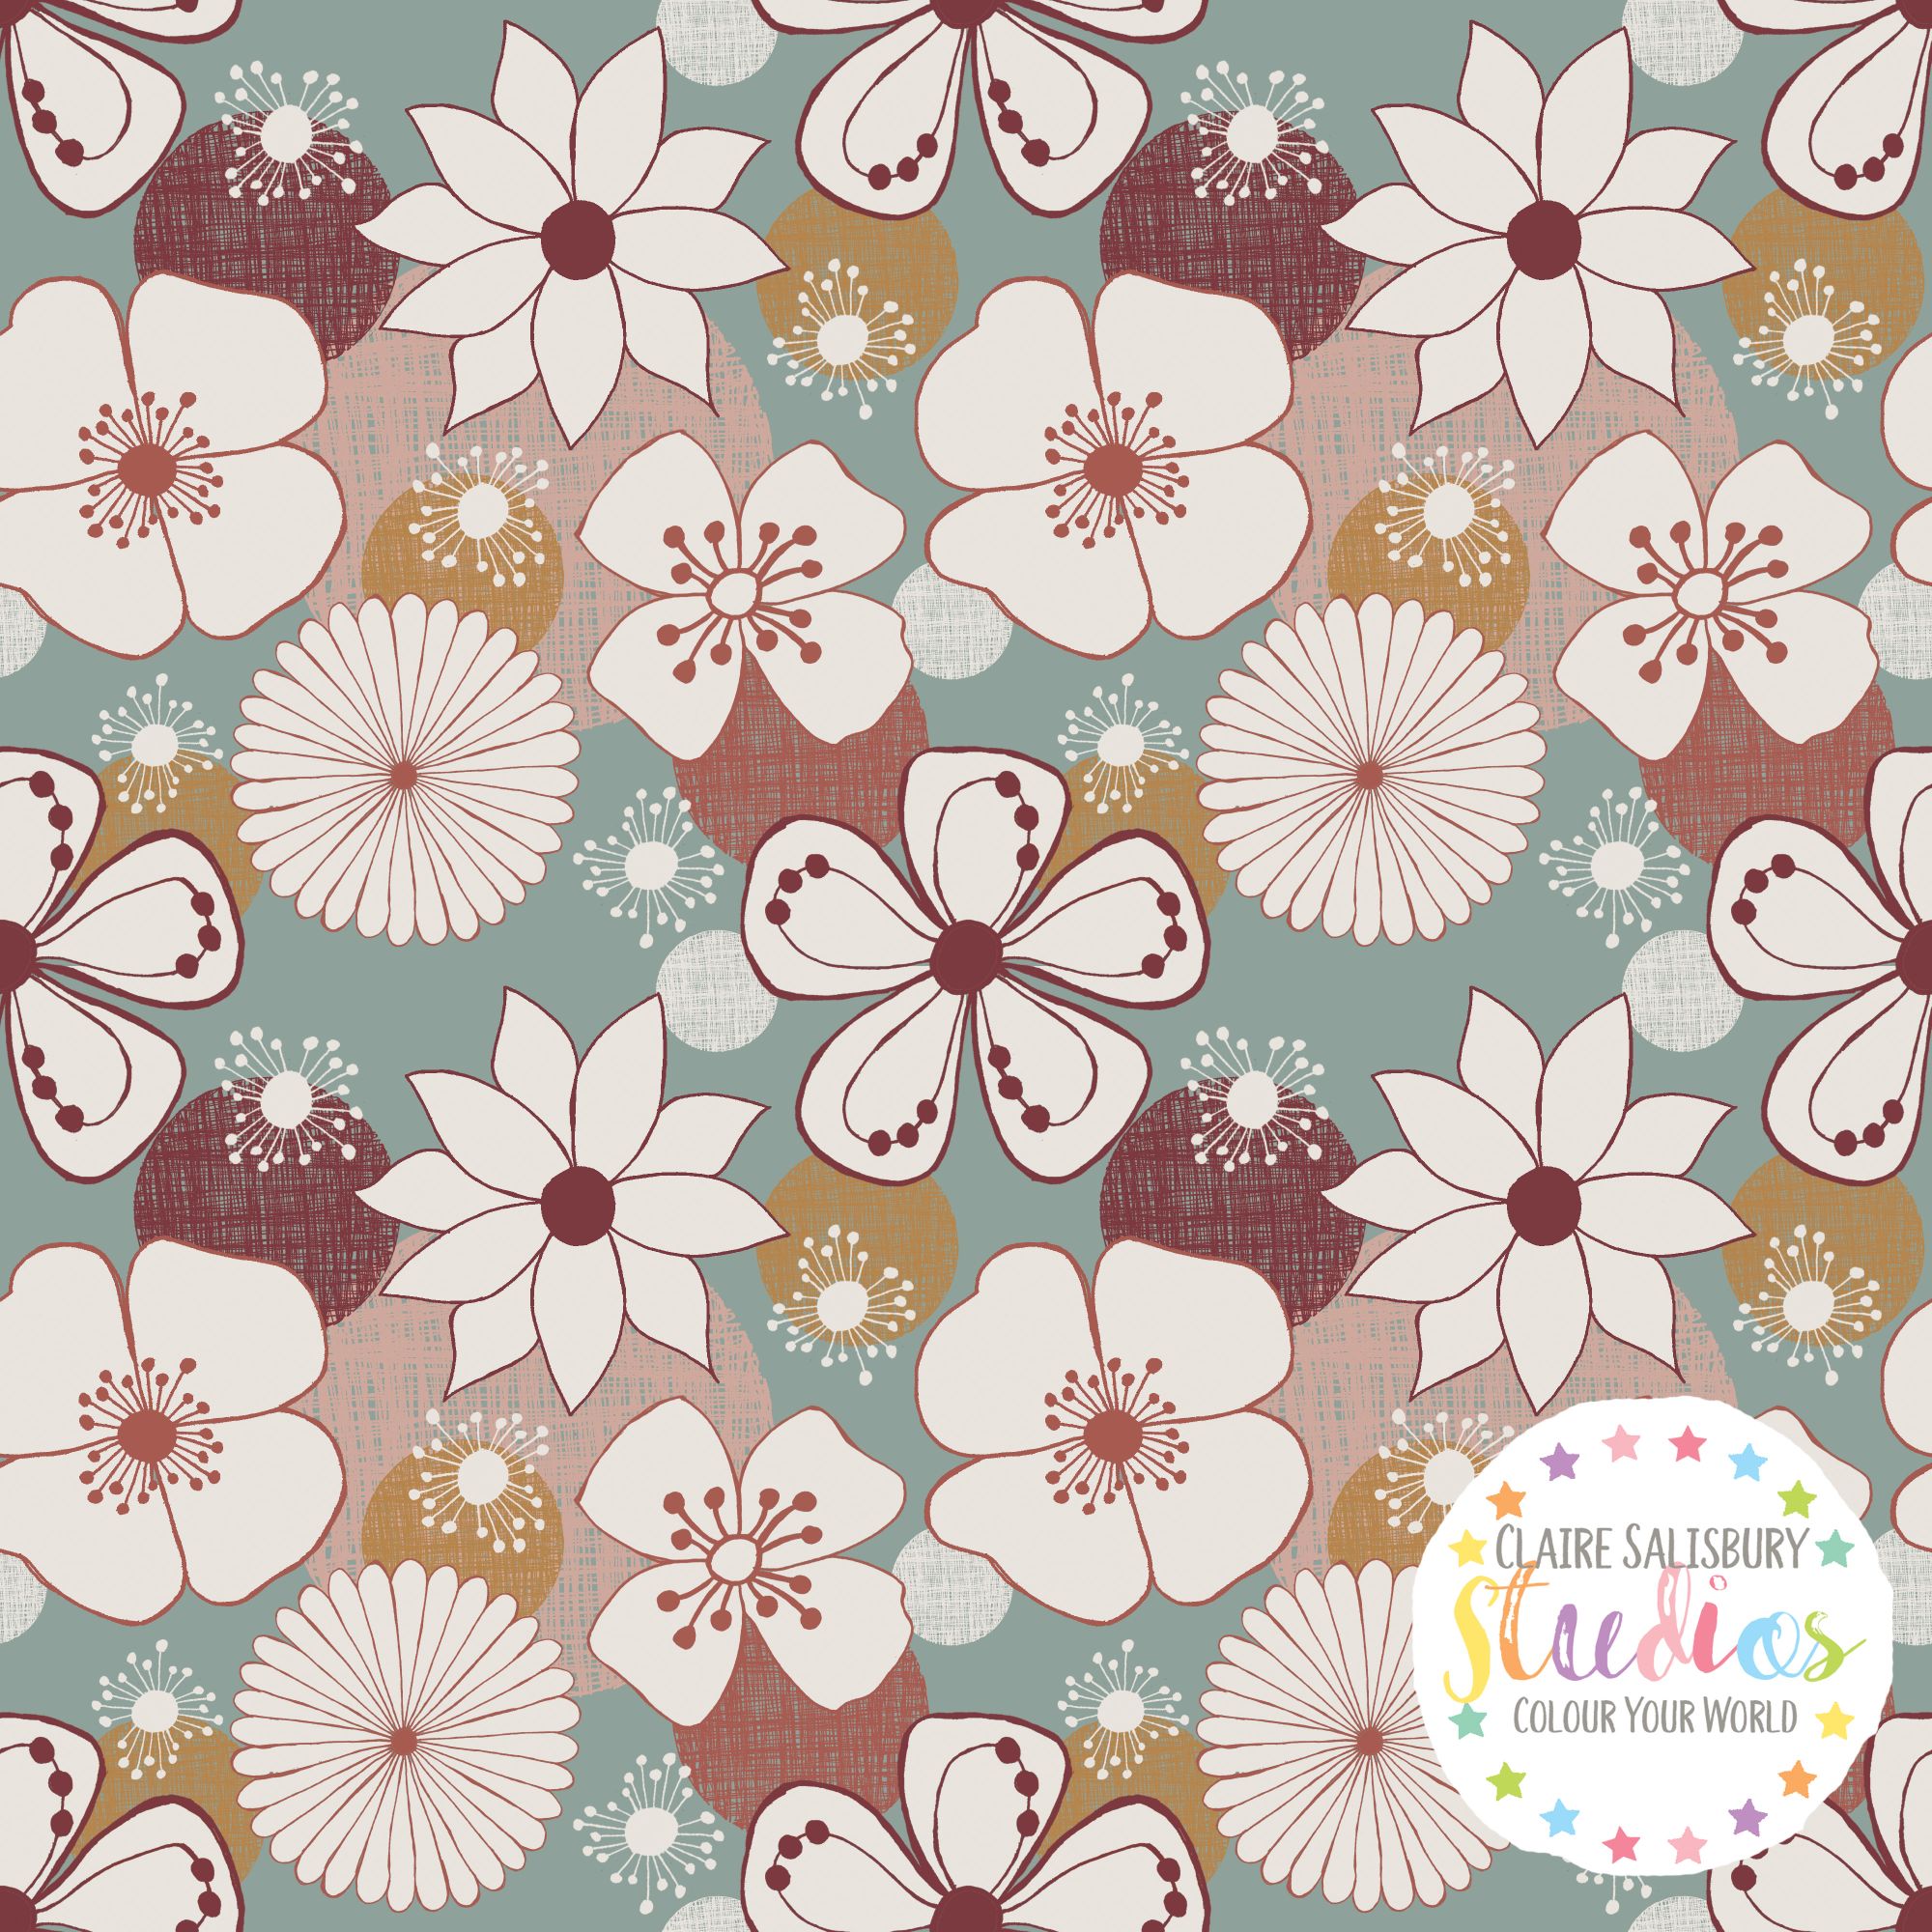 CRAFTED HERITAGE SURFACE PATTERN COLLECTION - FLORAL DAY DREAM PATTERN